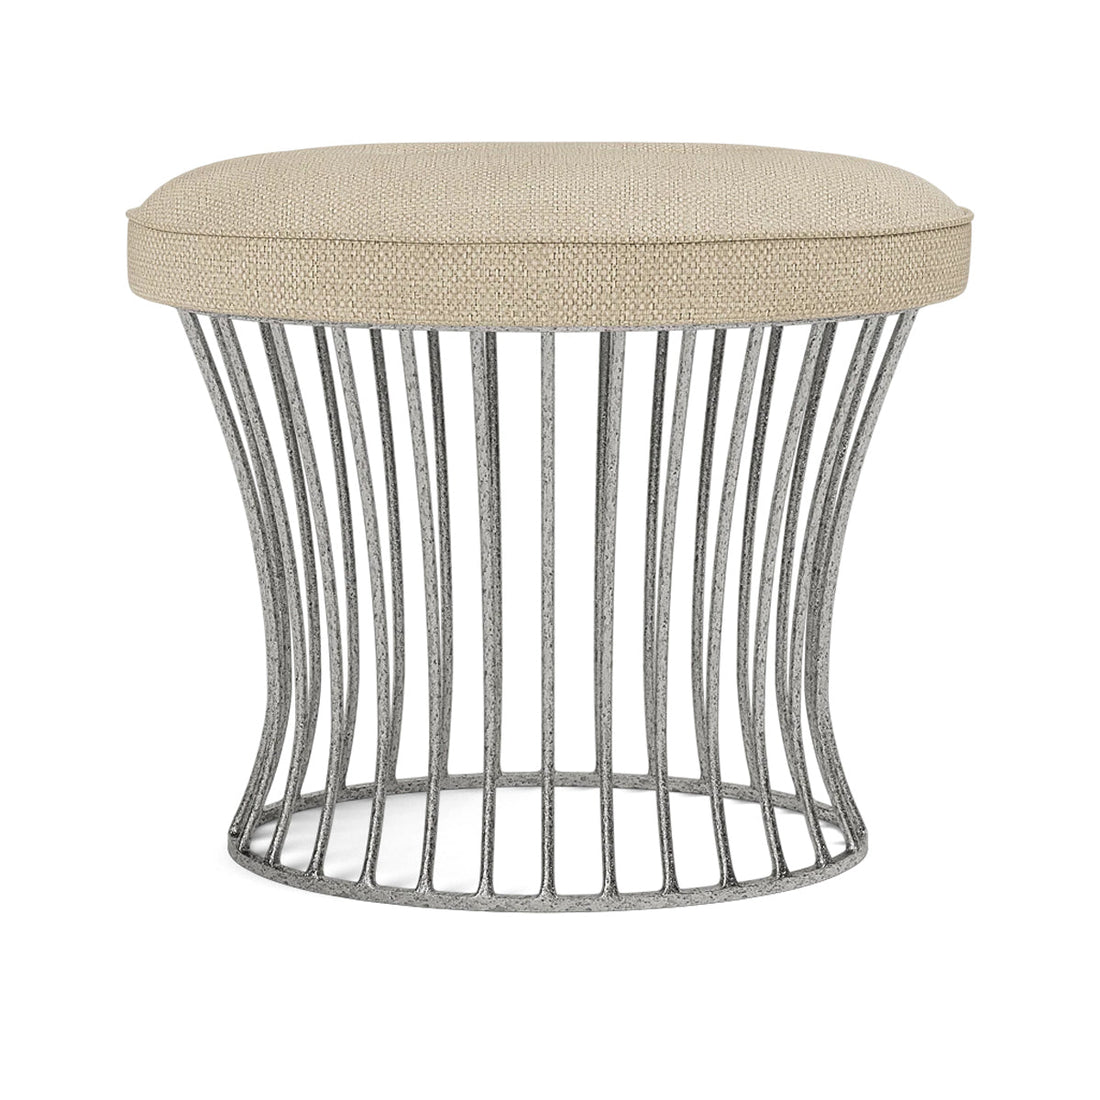 Made Goods Roderic Oval Stool in Klein Ash Rayon/Cotton